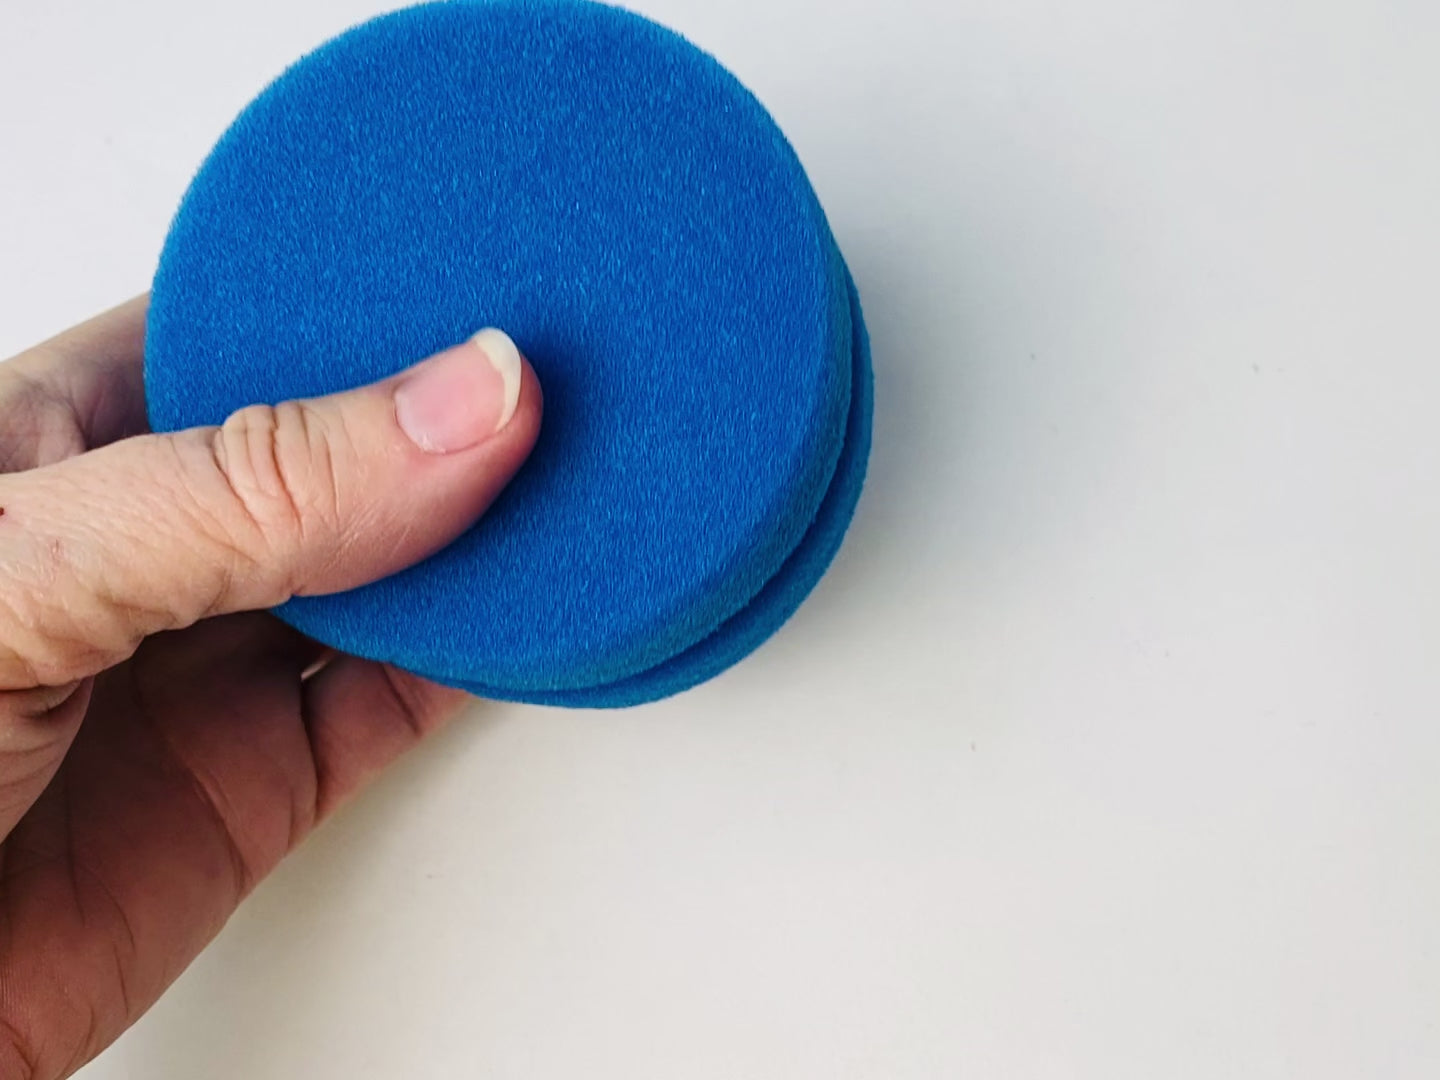 A 10 second video shows a hand holding, squeezing and turning Dixie Belle Paint's Blue Sponge Applicator against a white background.